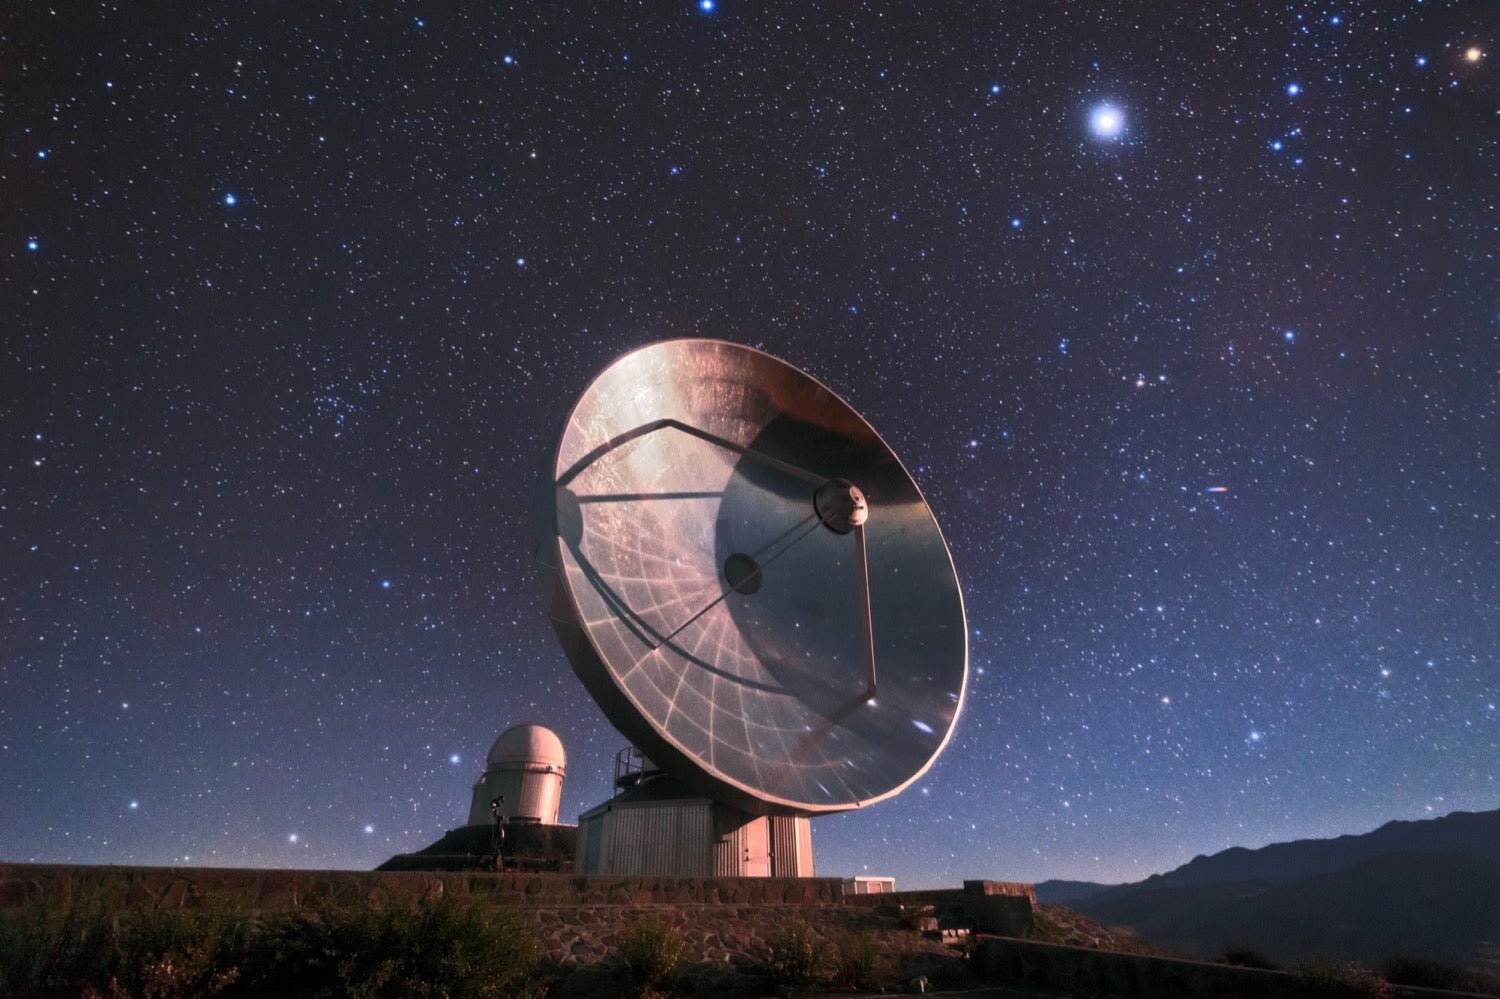 a large silver dished radio telescope that gleams under a star-studded night sky